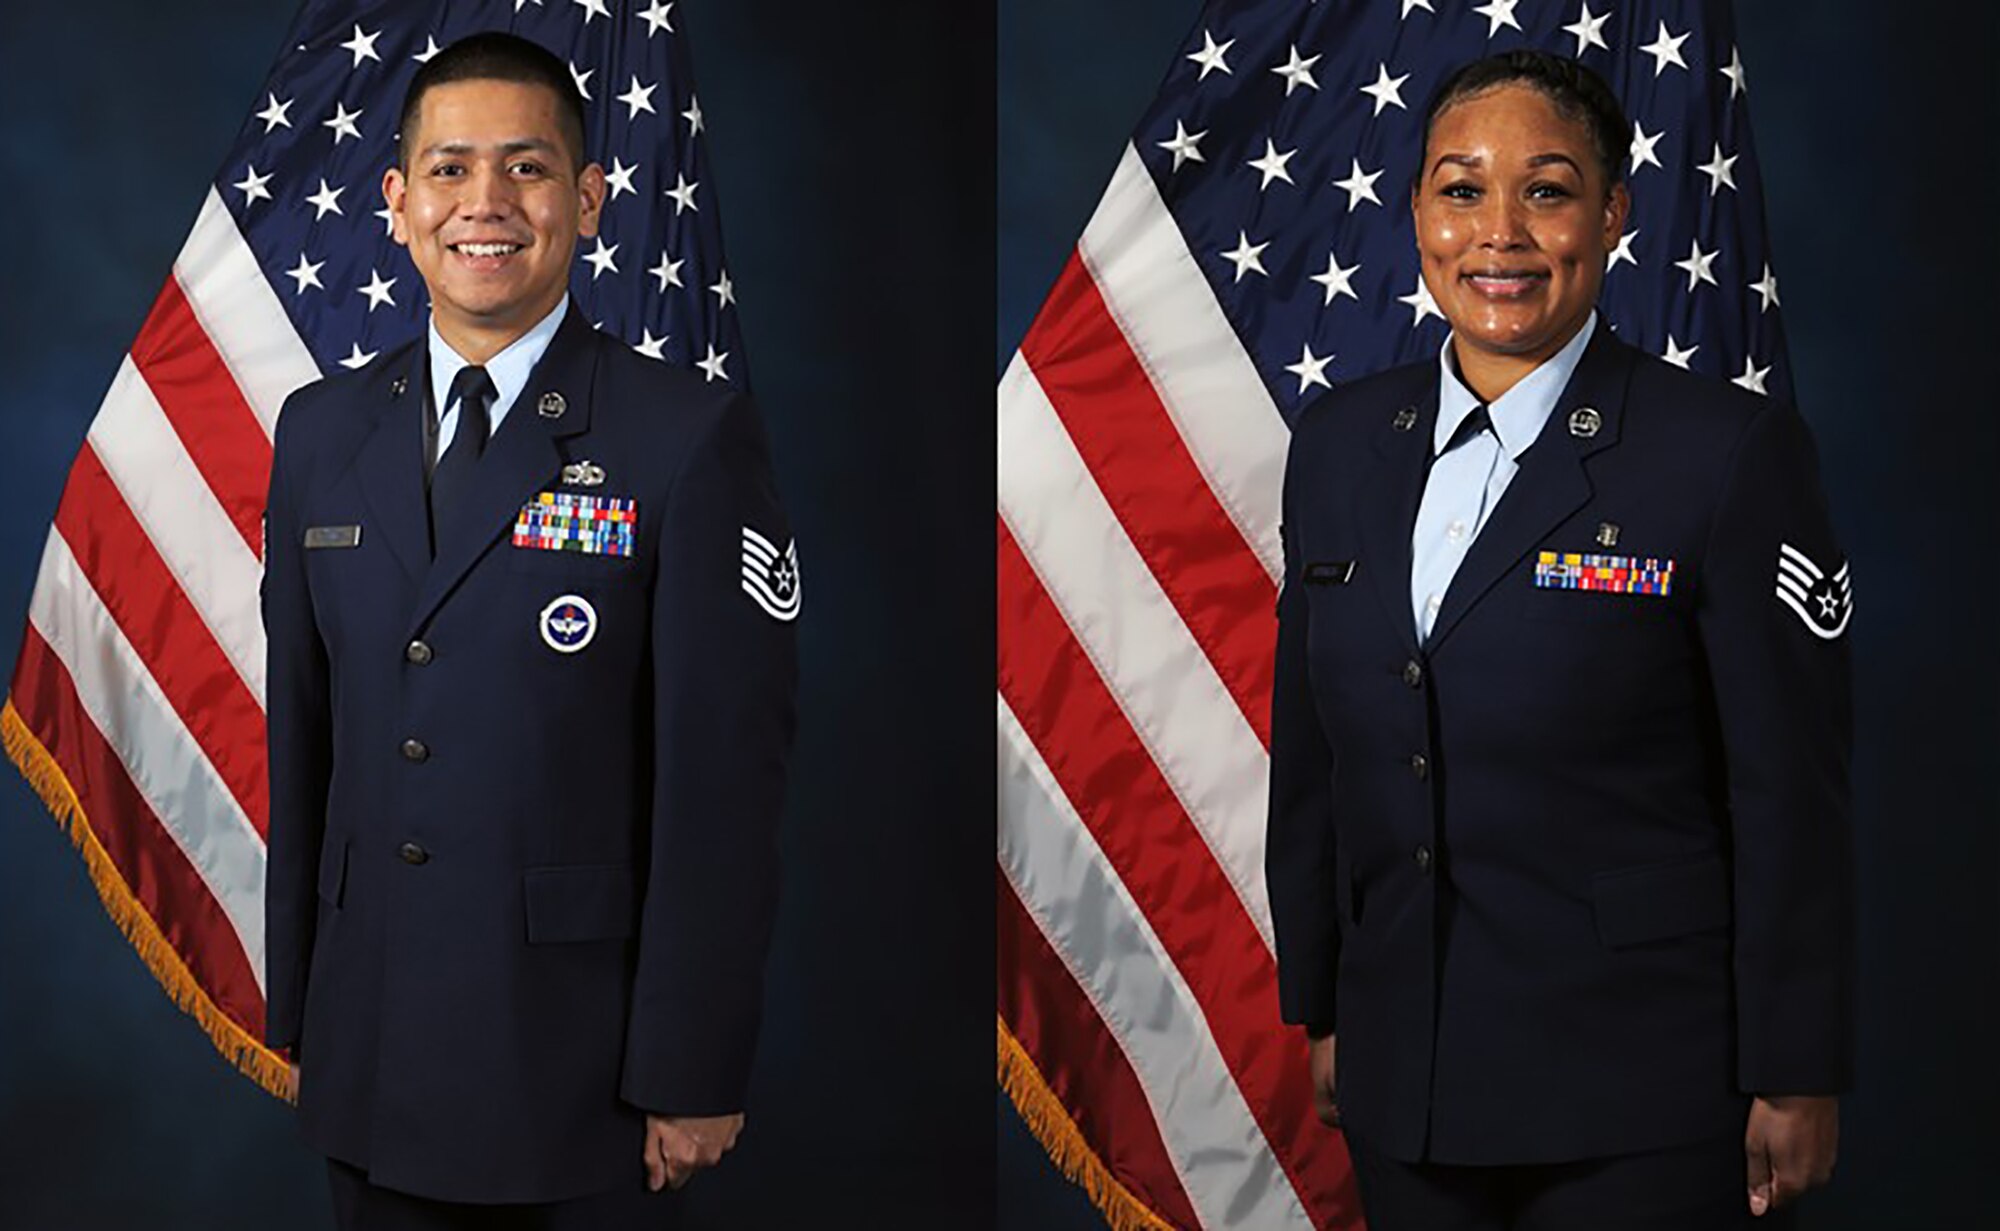 Joint Base San Antonio has selected two Airmen to represent the Air Force in the city’s annual Fiesta celebration. Tech. Sgts. Arturo Gomez Jr. and Lateshia Burgess will serve as Air Force ambassadors for Fiesta 2021, scheduled to take place April 15-25.